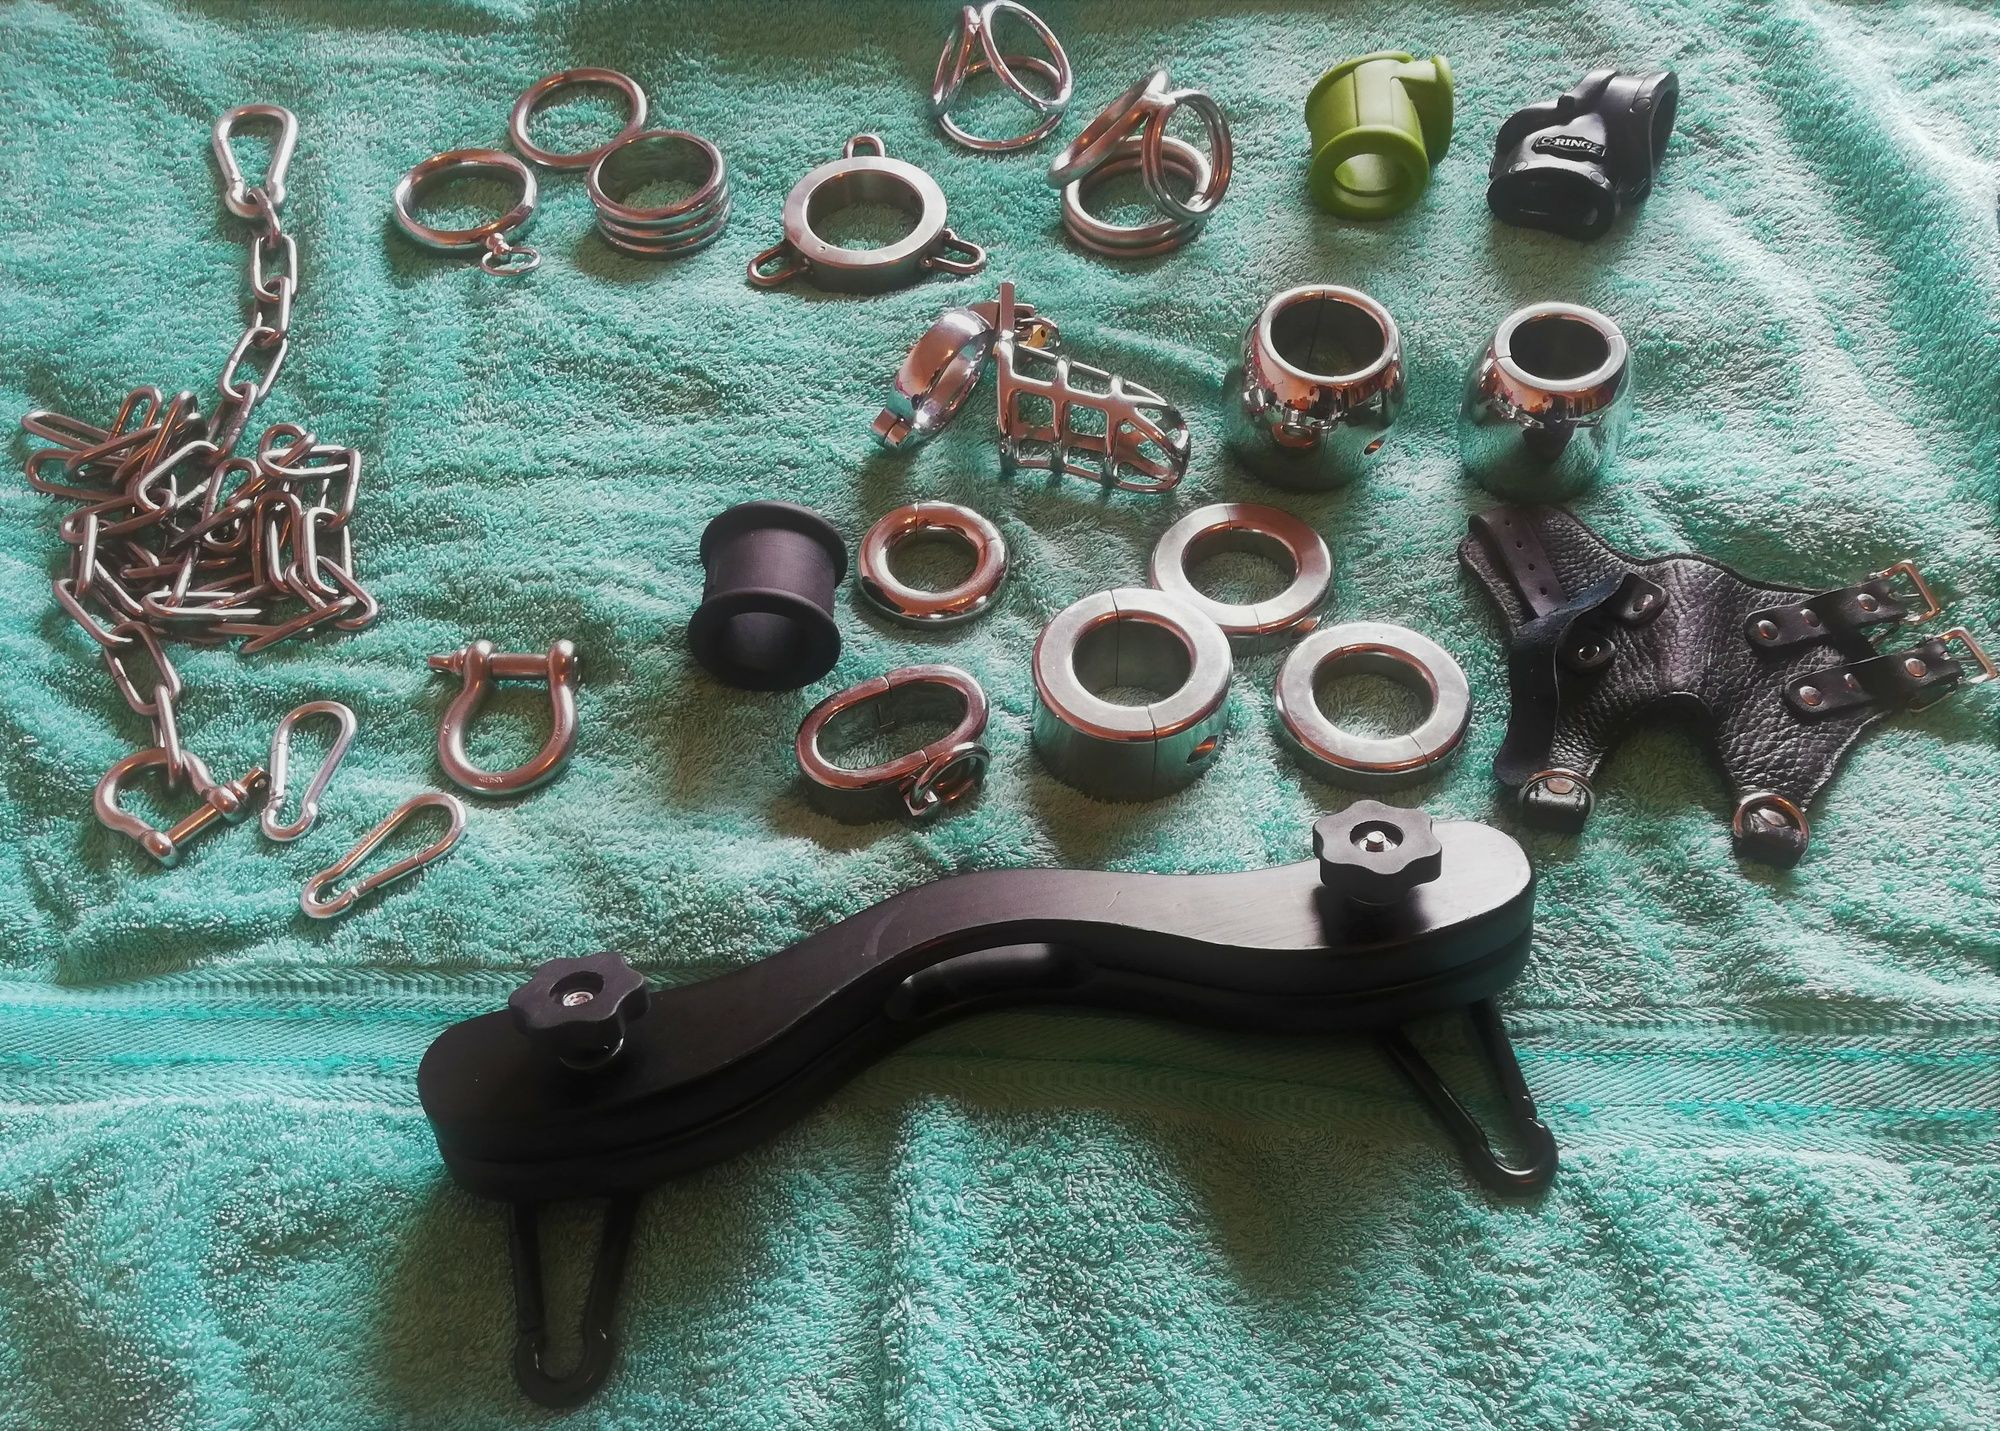 cockrings and ballstretchers